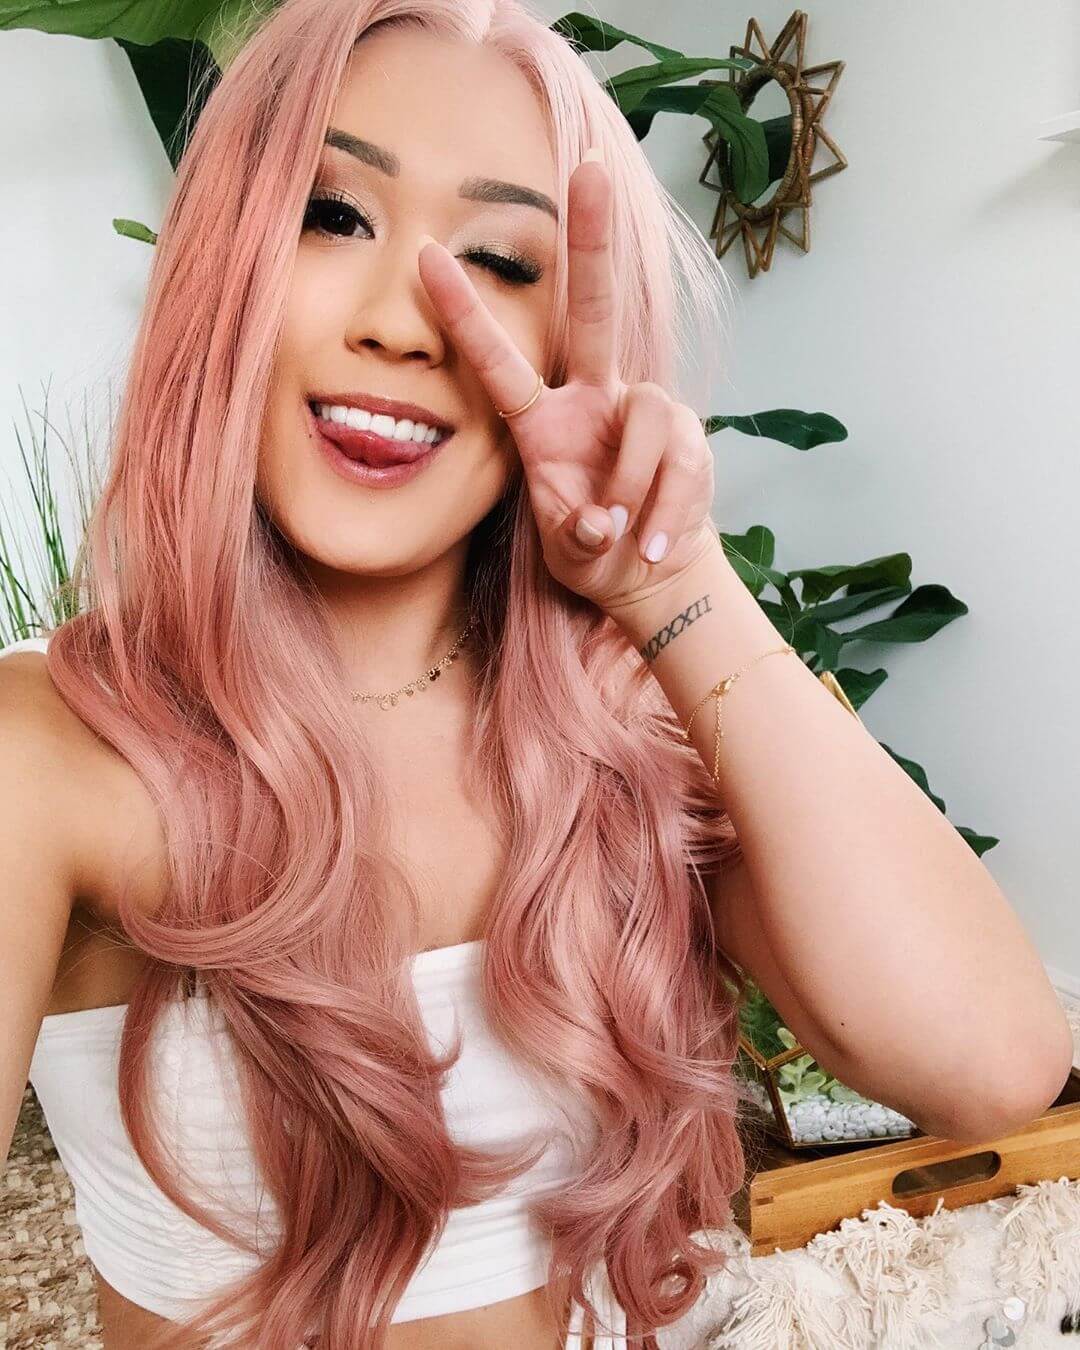 51 Sexy LaurDIY Boobs Pictures Are Essentially Attractive 33